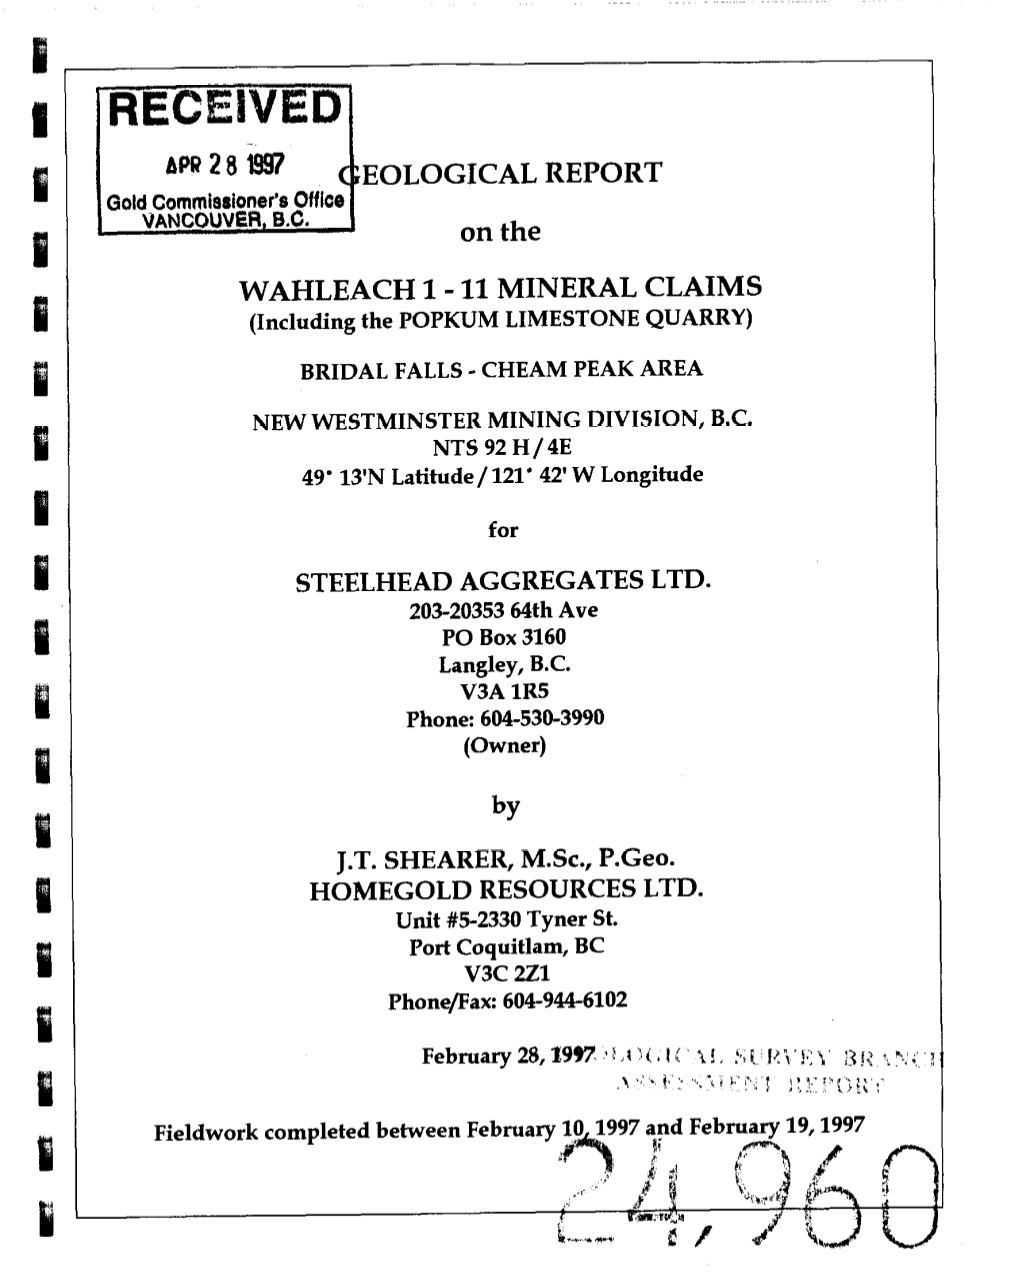 EOLOGICAL REPORT on the WAHLEACH 1 - 11 MINERAL CLAIMS (Including the POPKUM LIMESTONE QUARRY)